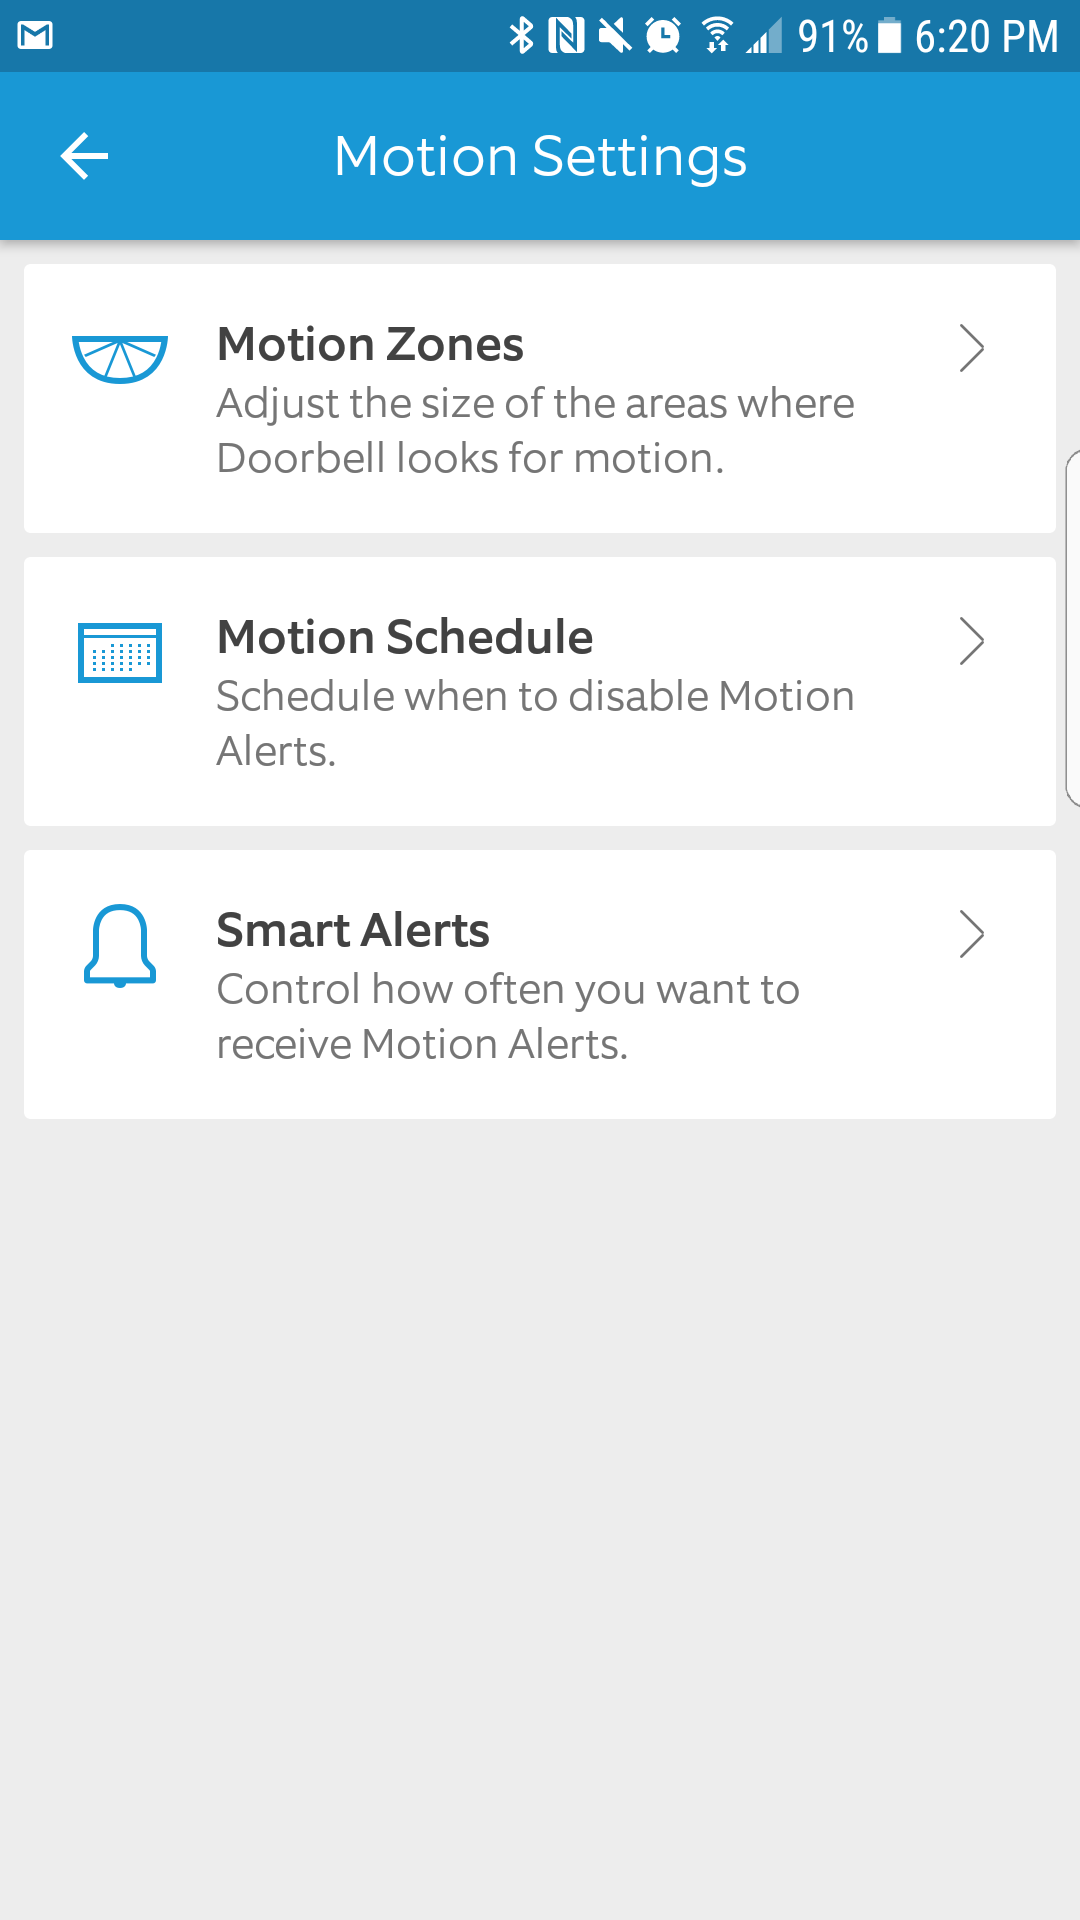 Here are the three sections of the Motion Sensor settings.